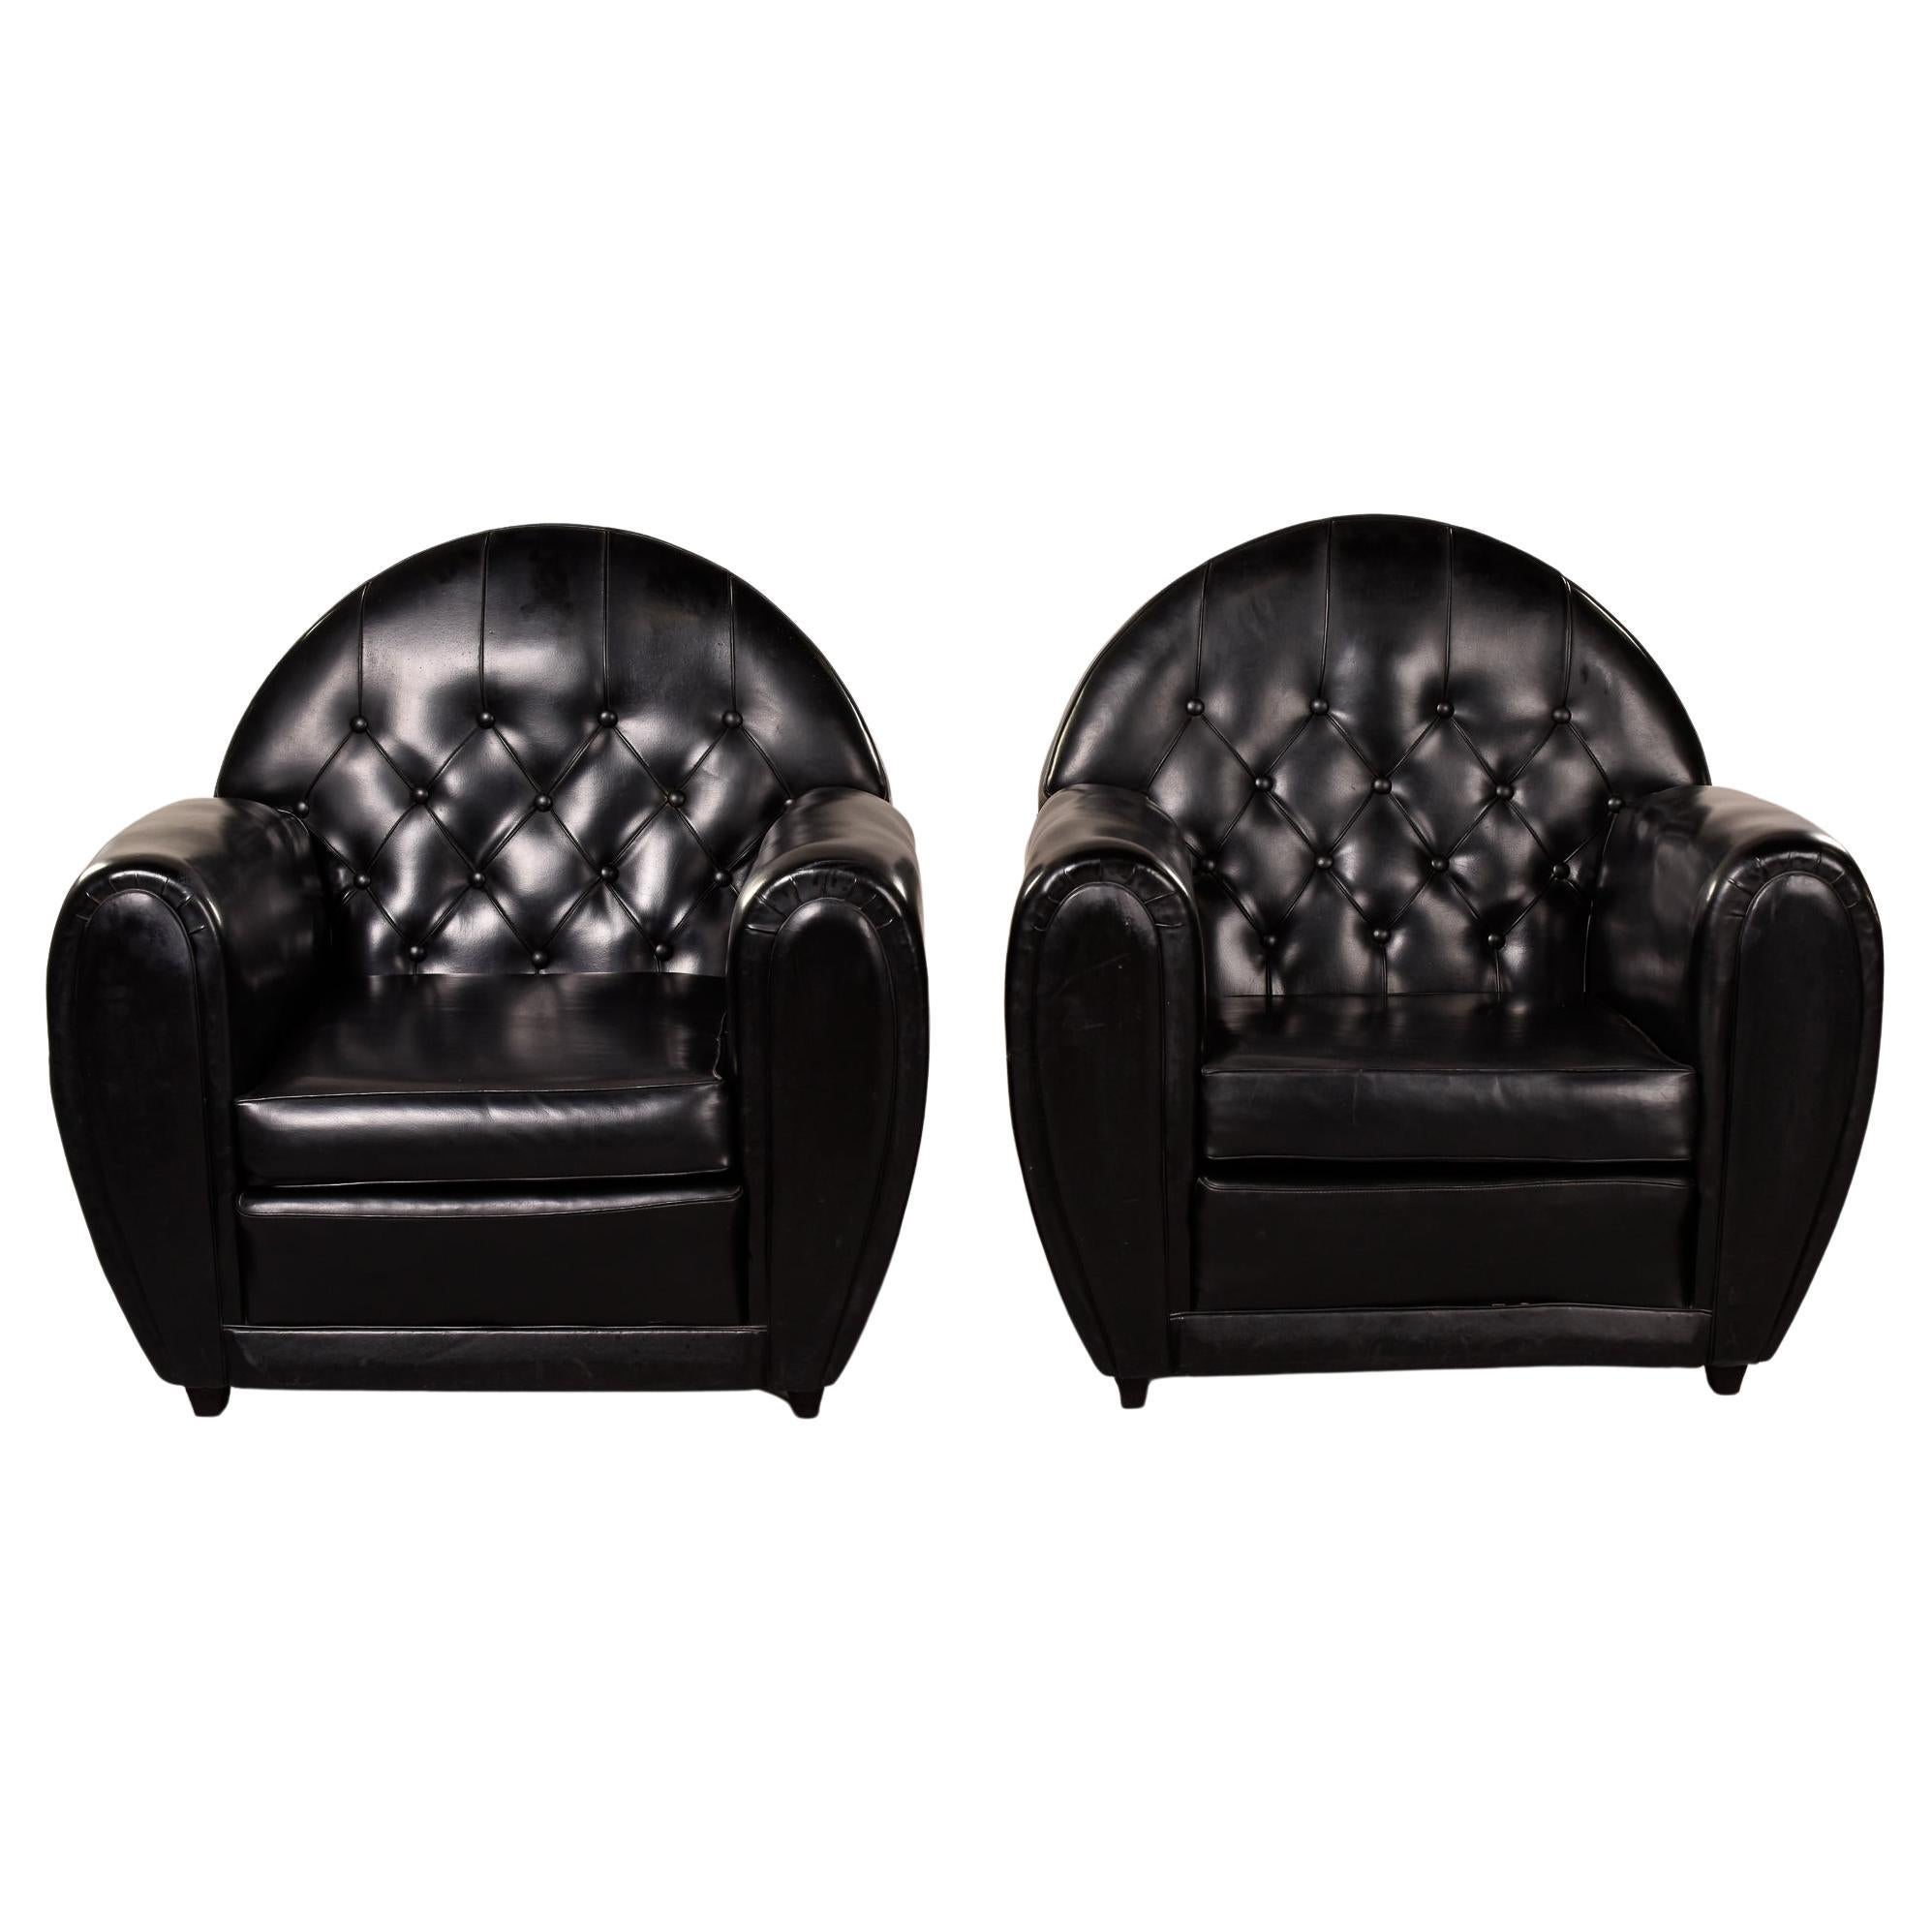 Pair French Art Deco Black Leather Club Chairs